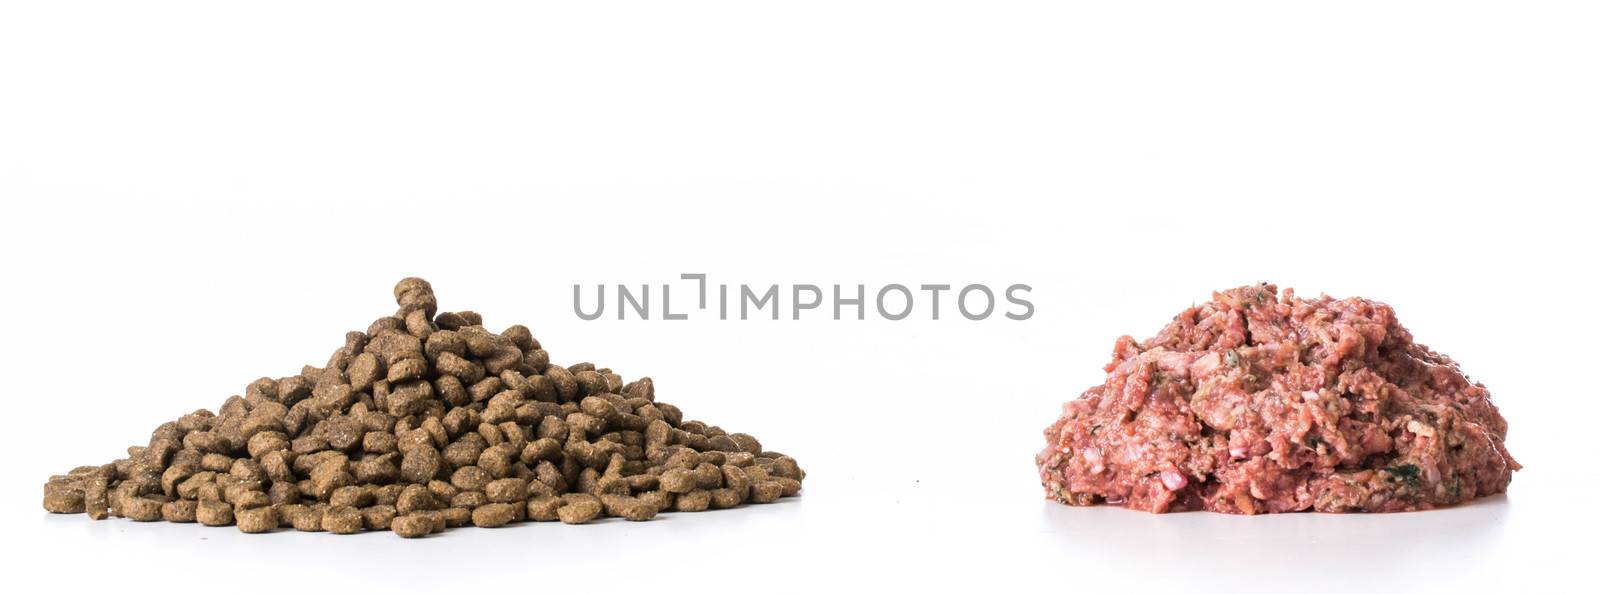 kibble and raw pile of food isolated on white background